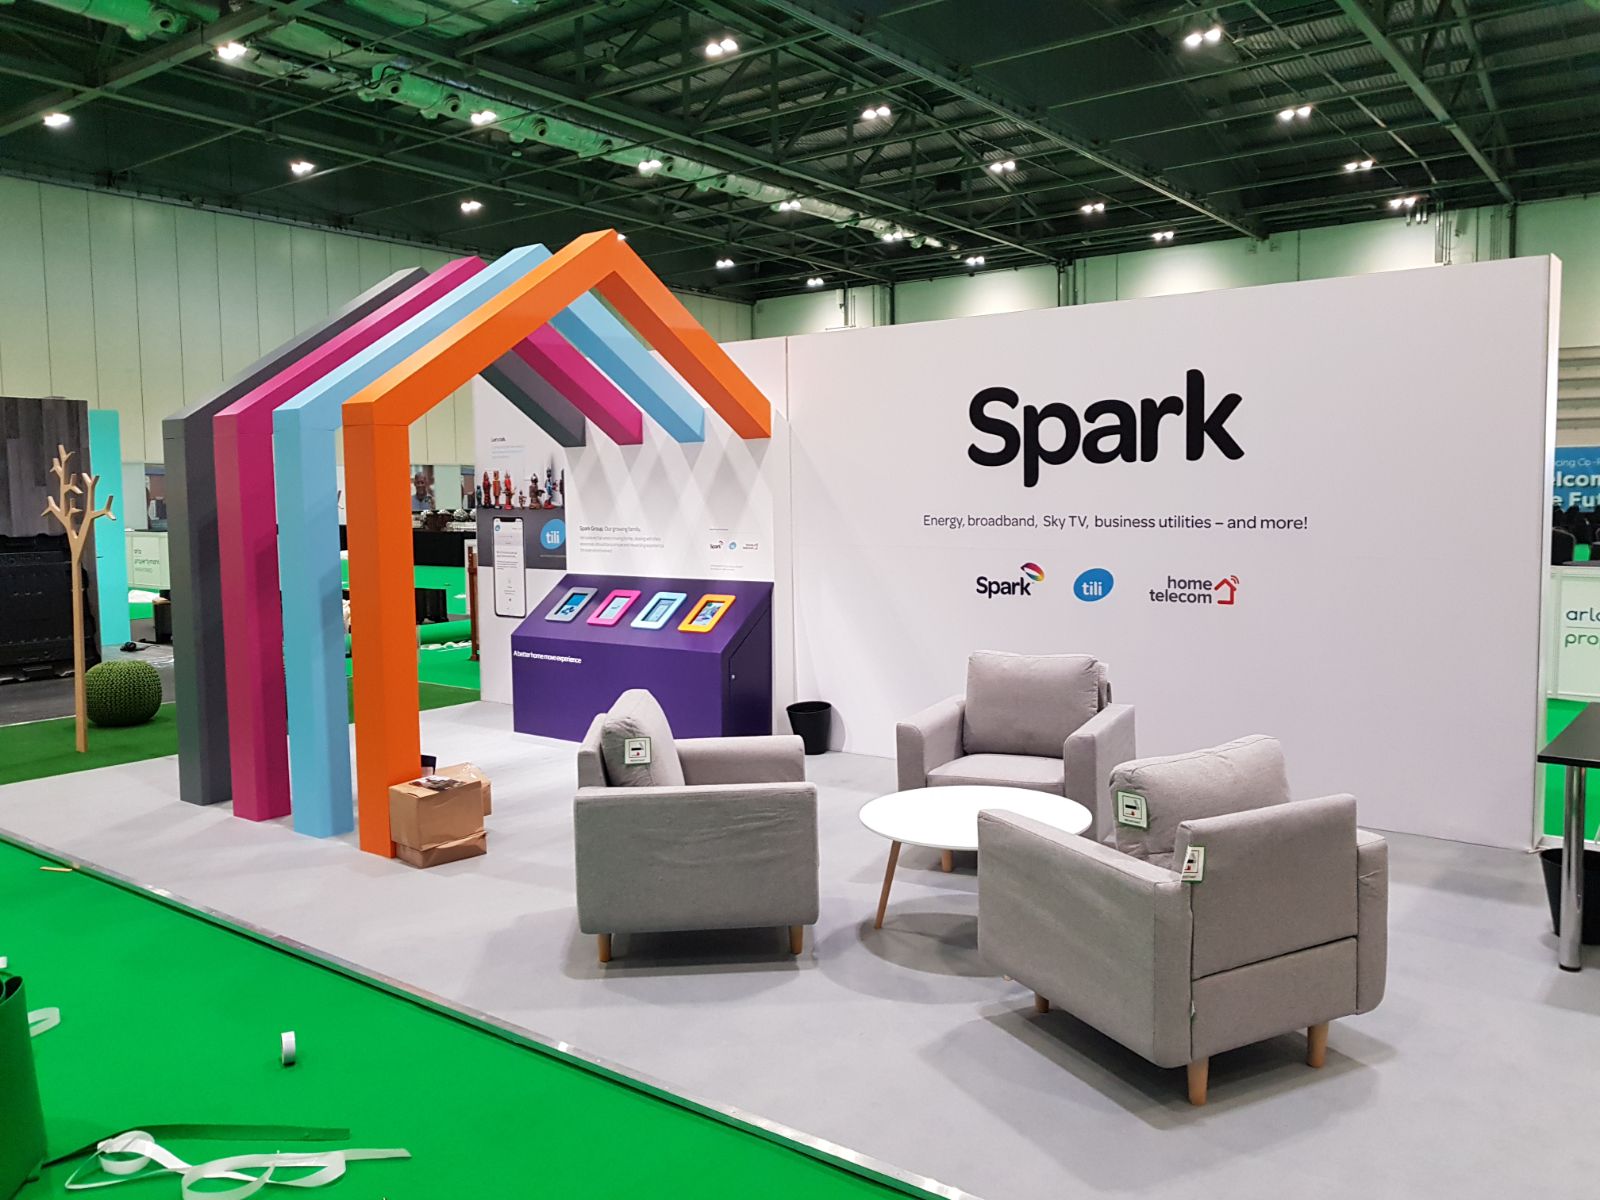 Exhibition stand for Spark Energy